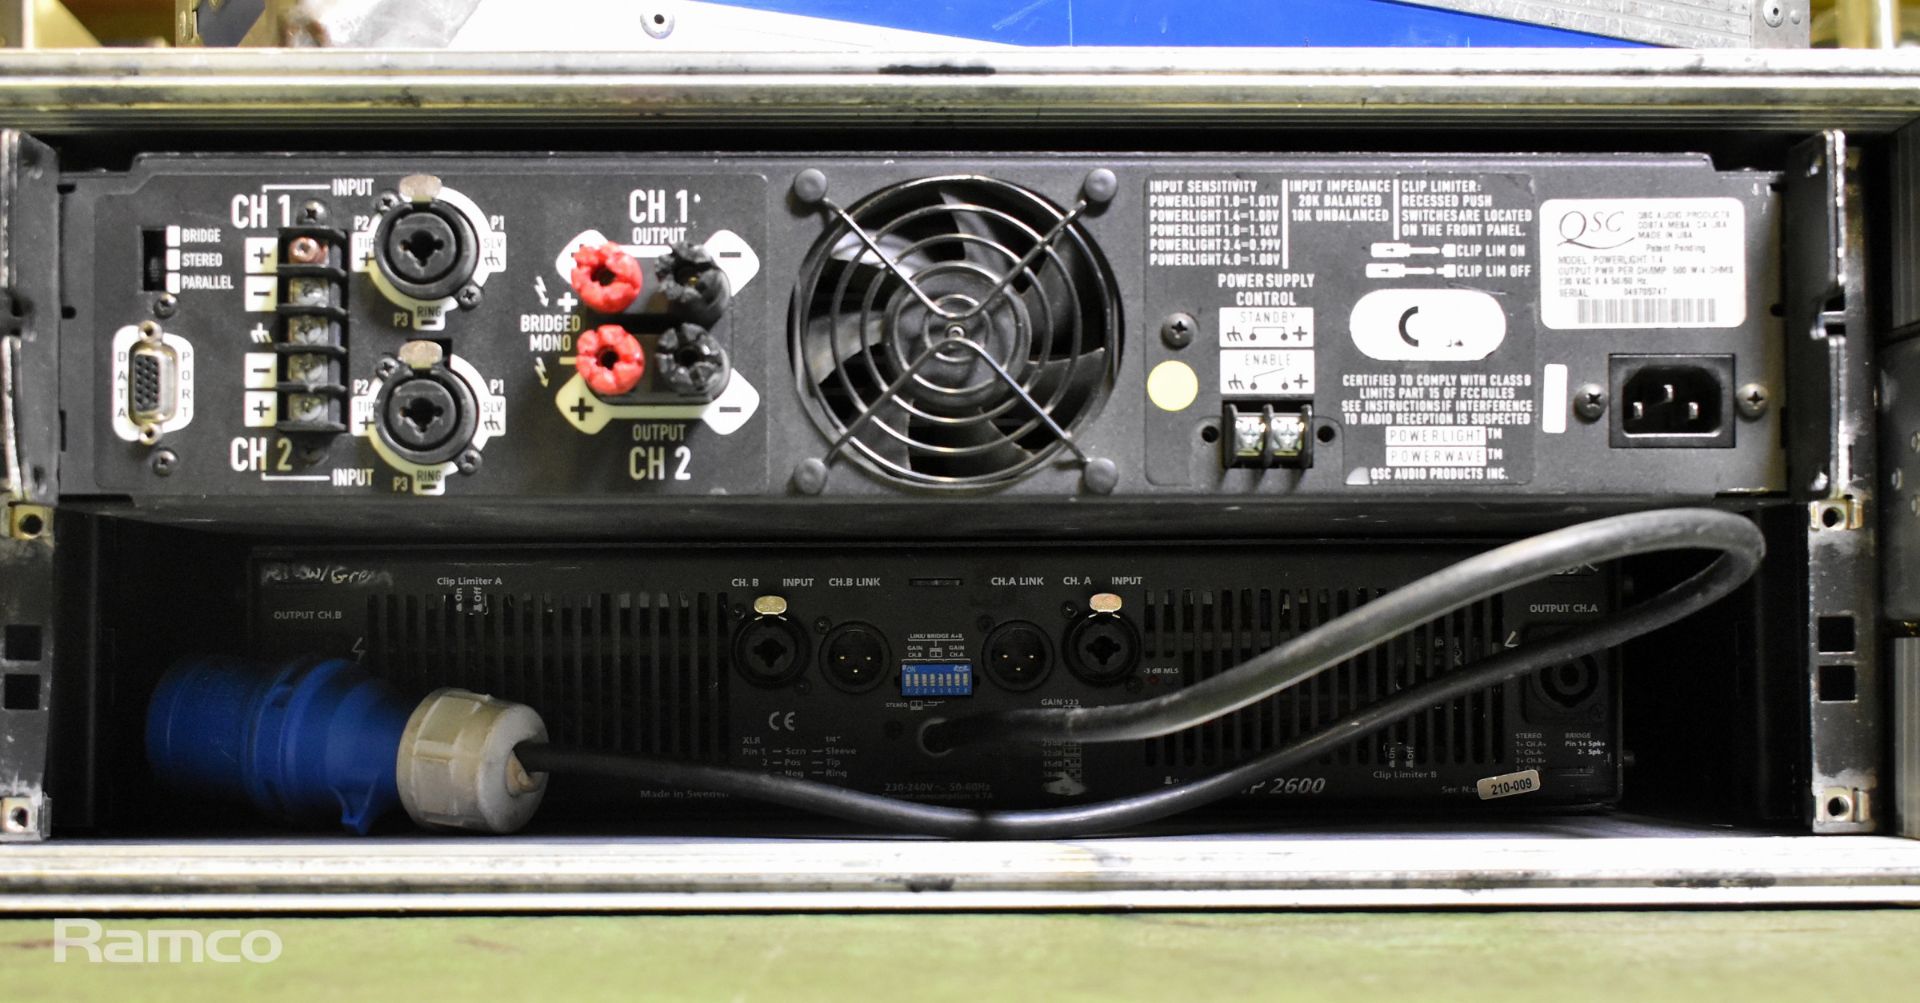 Lab Gruppen FP2600 amplifier and QSC Powerlight 1.4 amplifier in a flightcase - Image 5 of 7